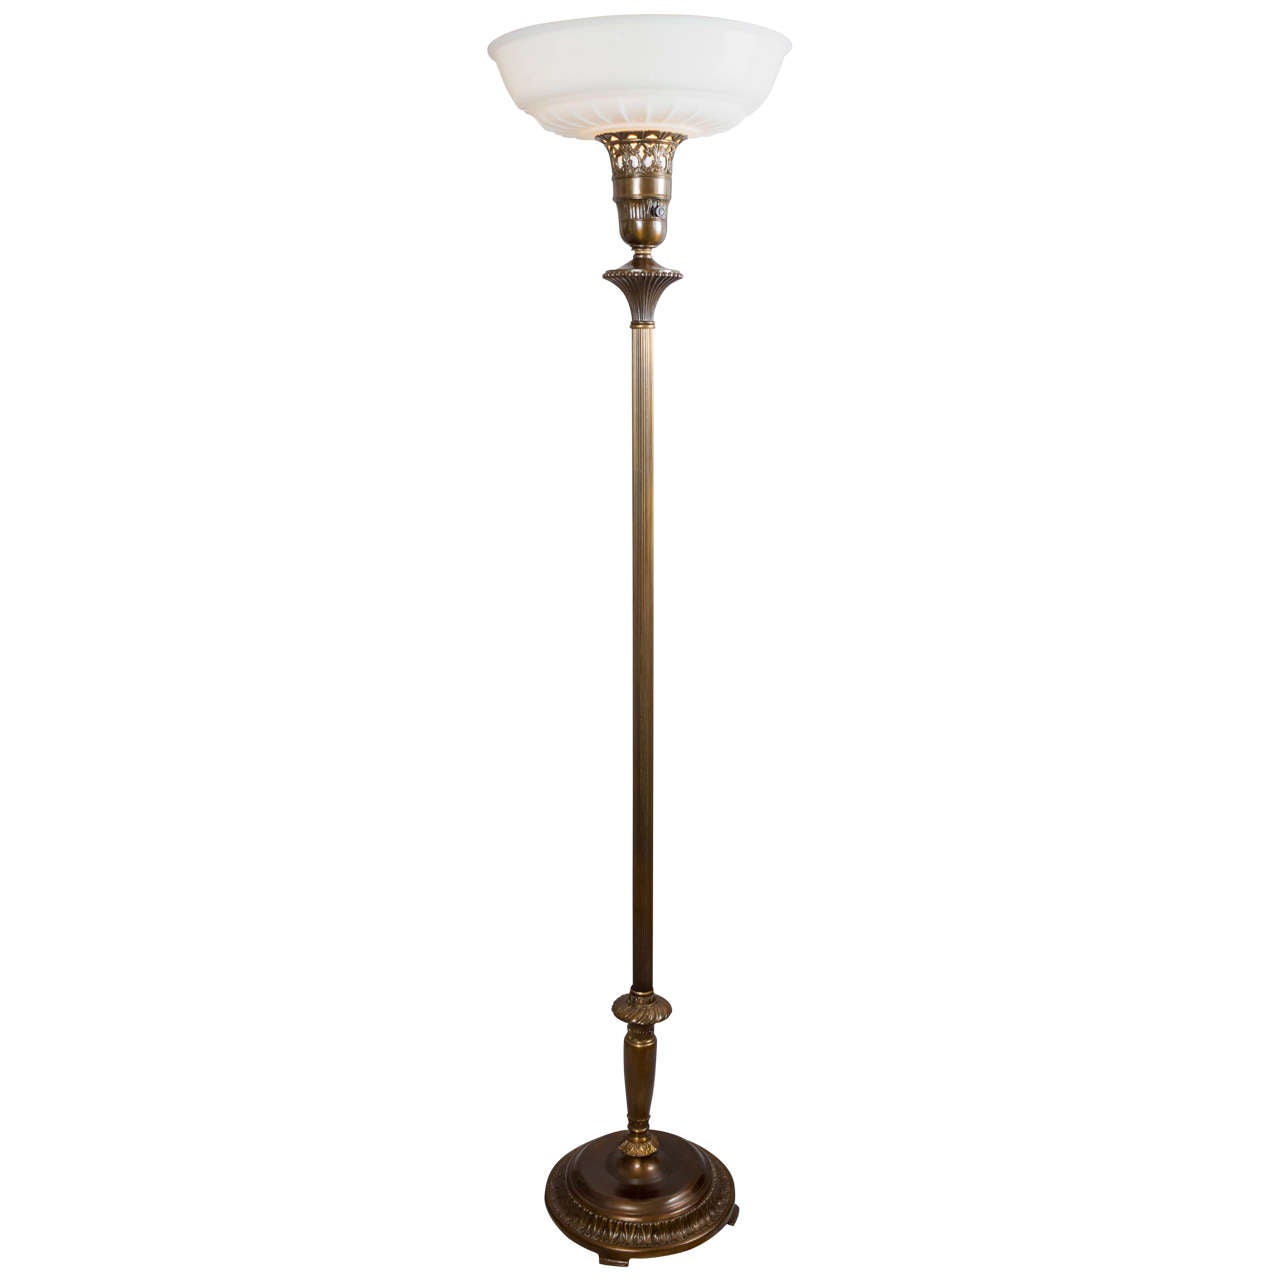 Folks are always asking us for a pair of torchiere floor lamps, and the fact is we rarely get them. Here is your chance. These are an exact pair including the original milk glass shades. Rich patina on the metal,and nice detailing highlight this